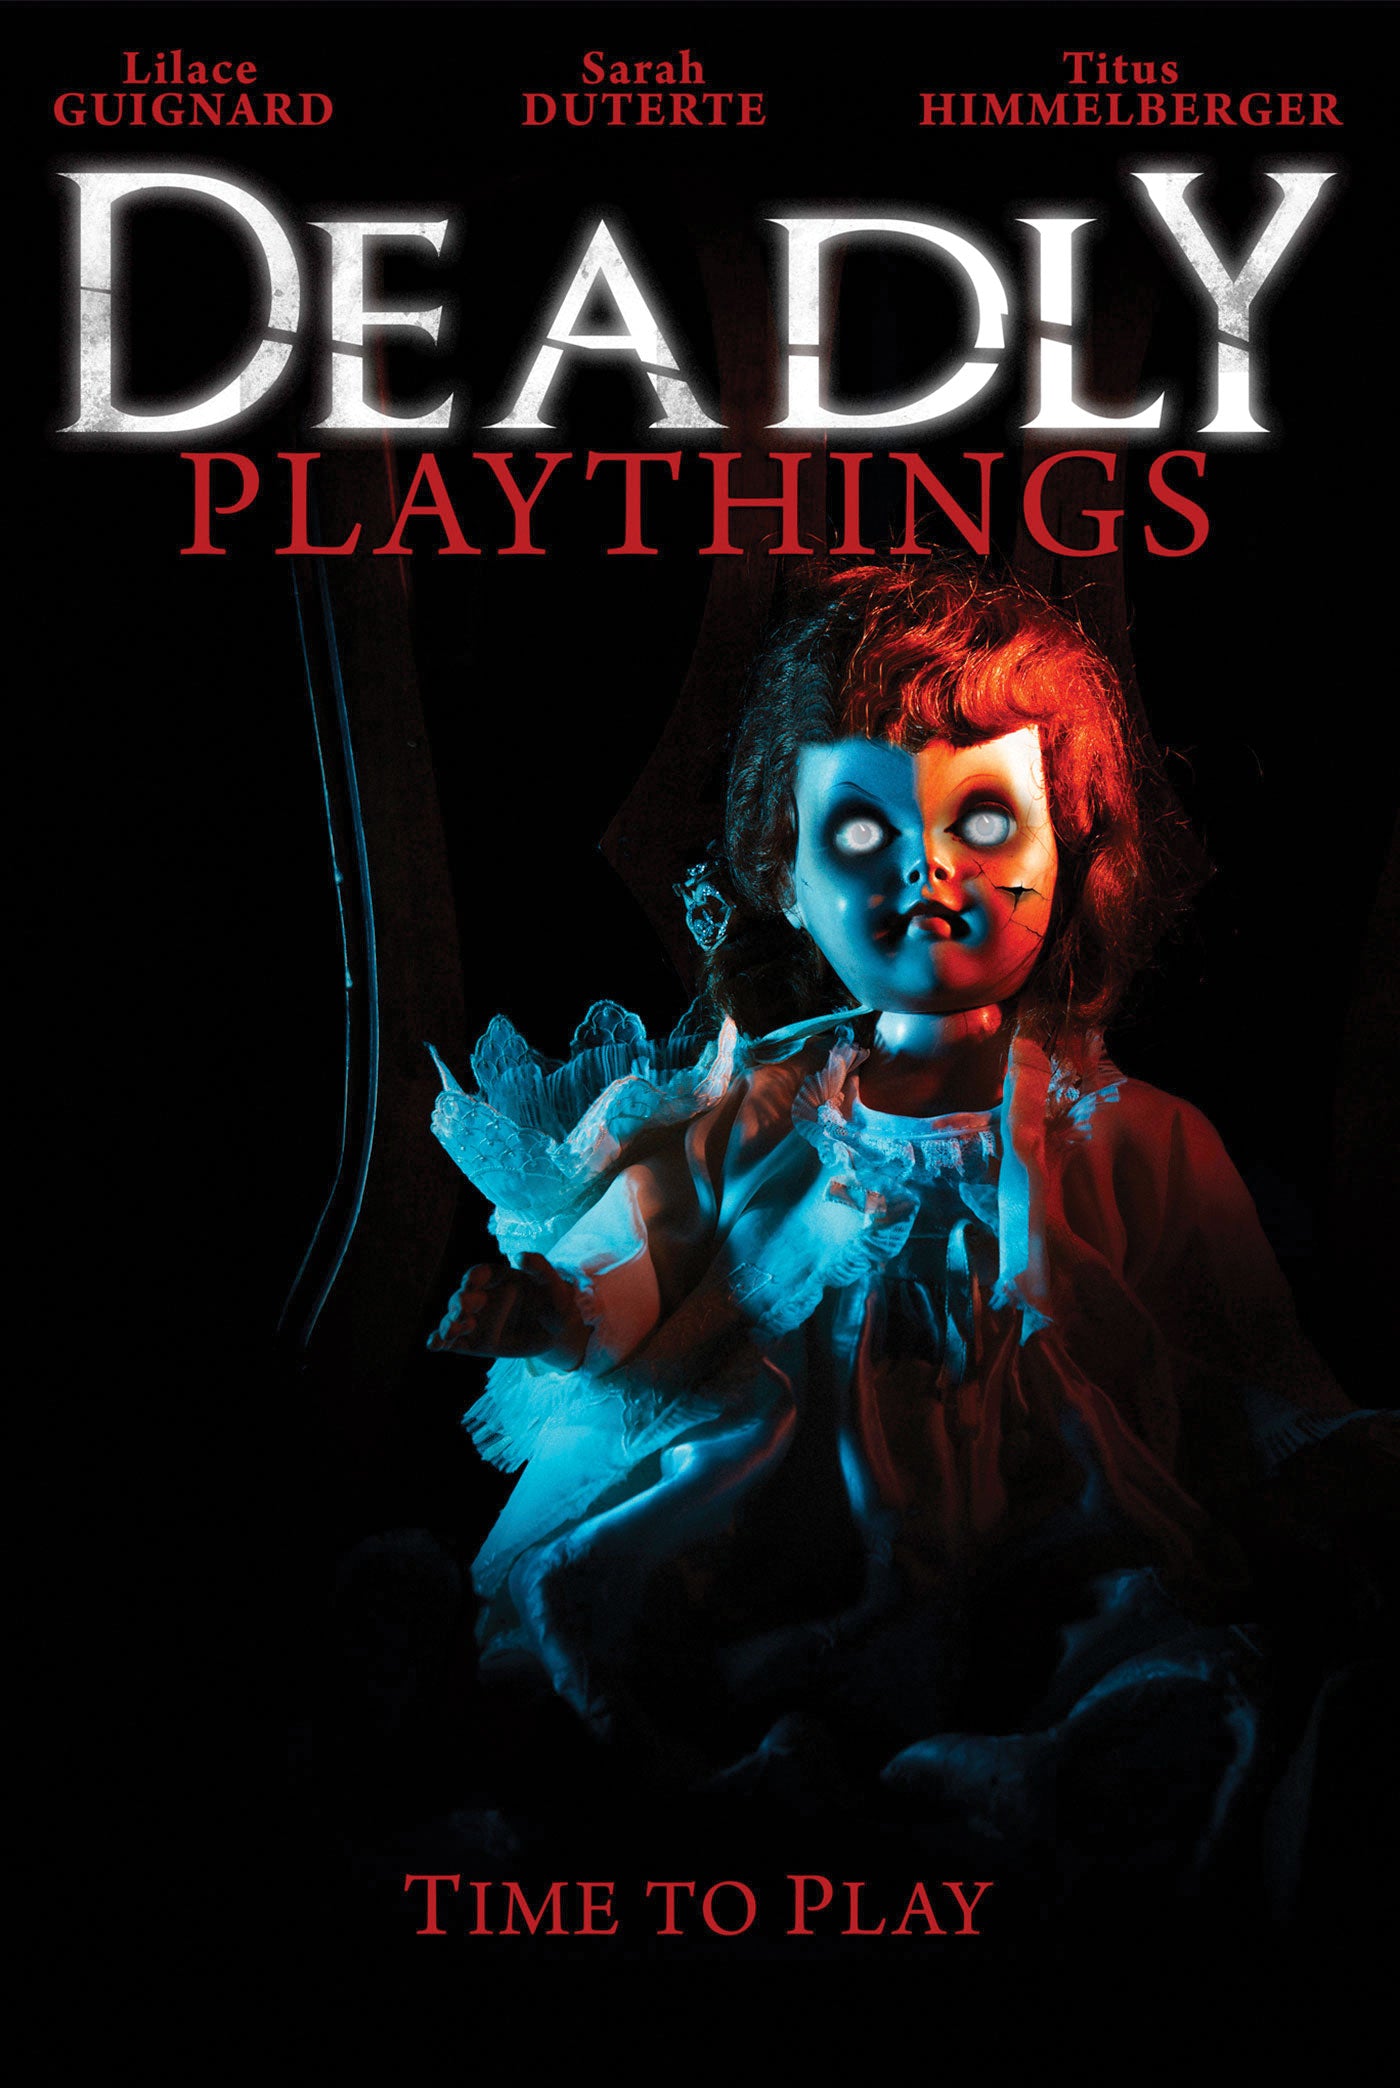 DEADLY PLAYTHINGS DVD